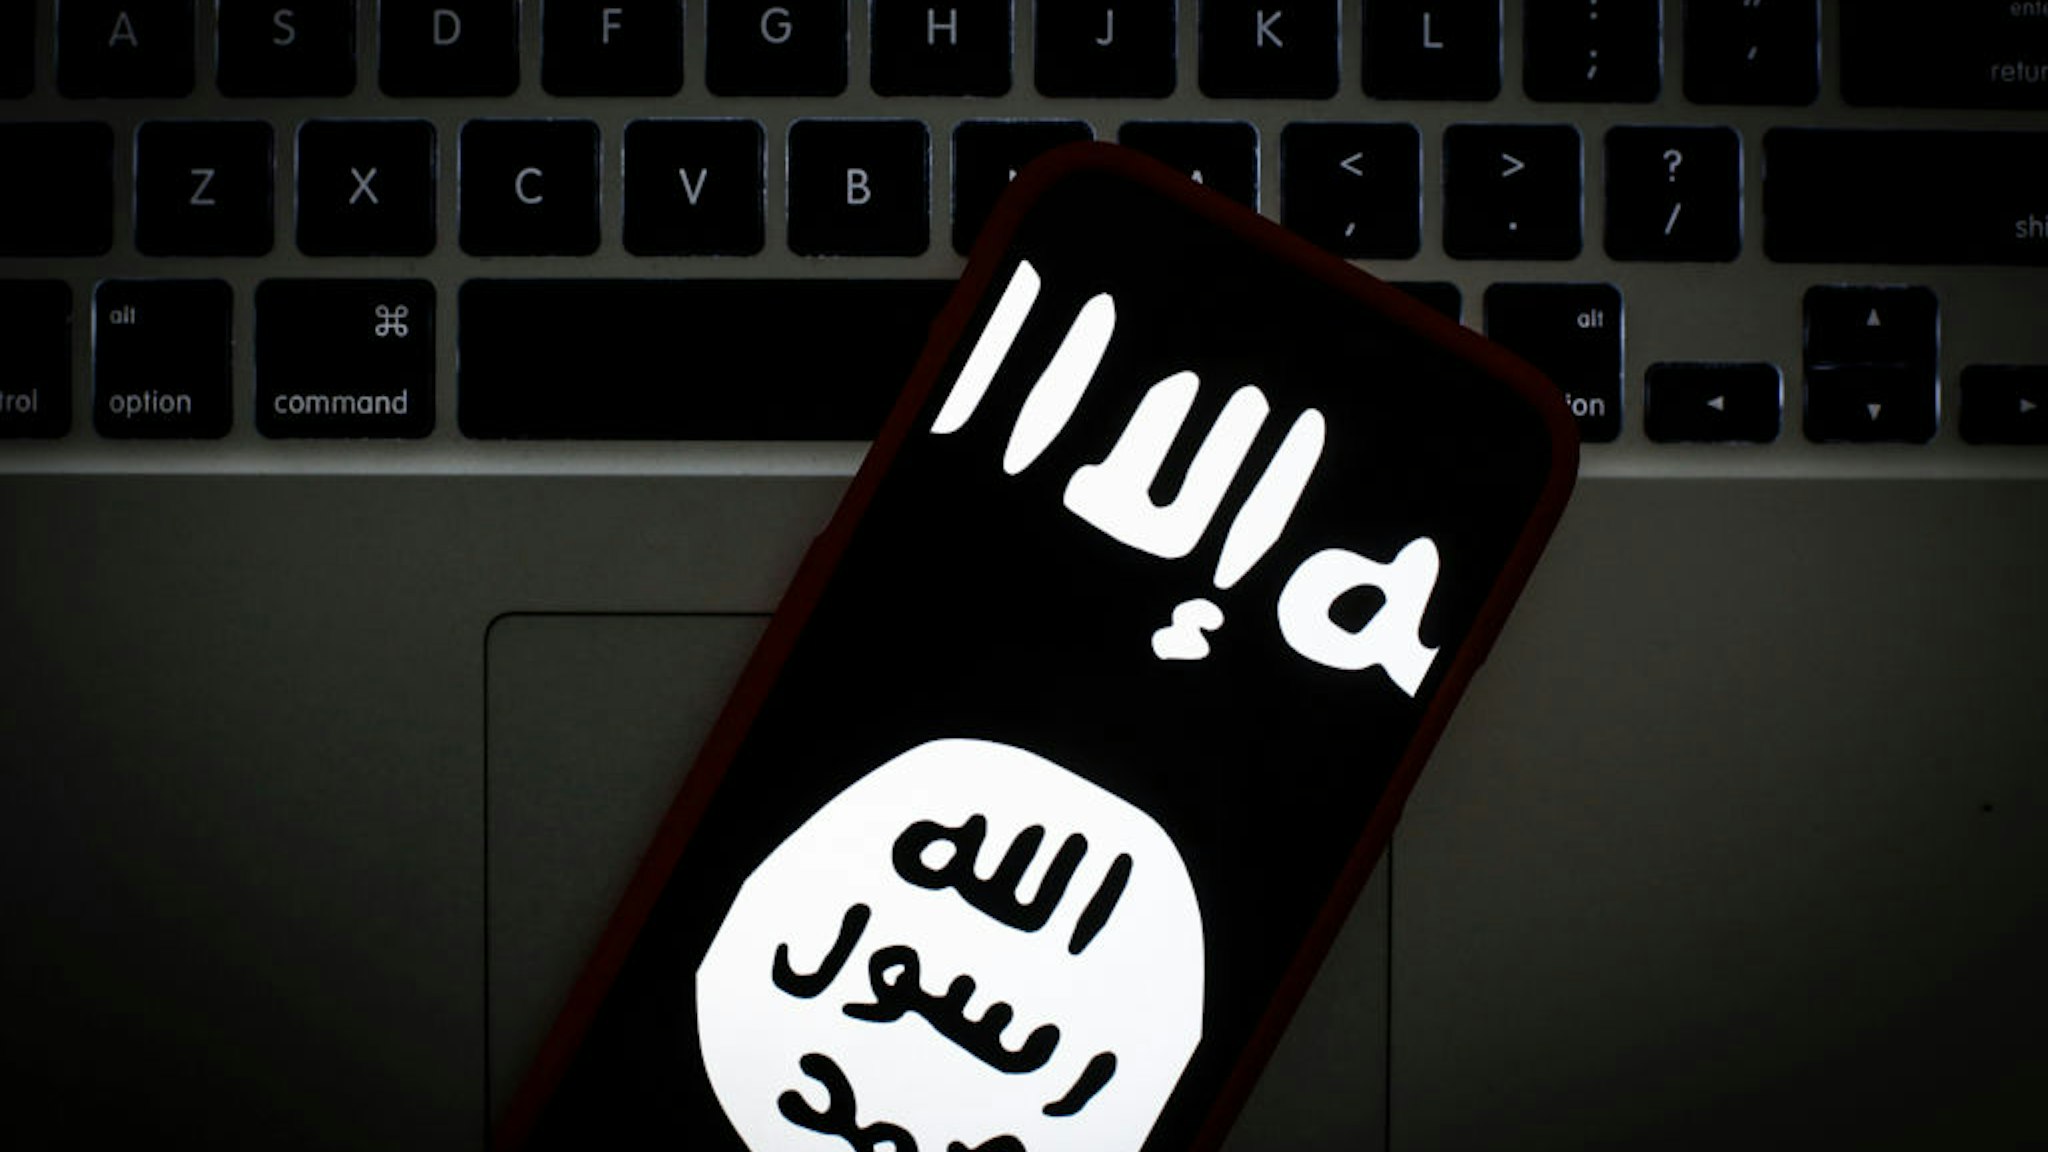 The Islamic State logo is seen on a portable mobile device in this photo illustration on January 22, 2019.